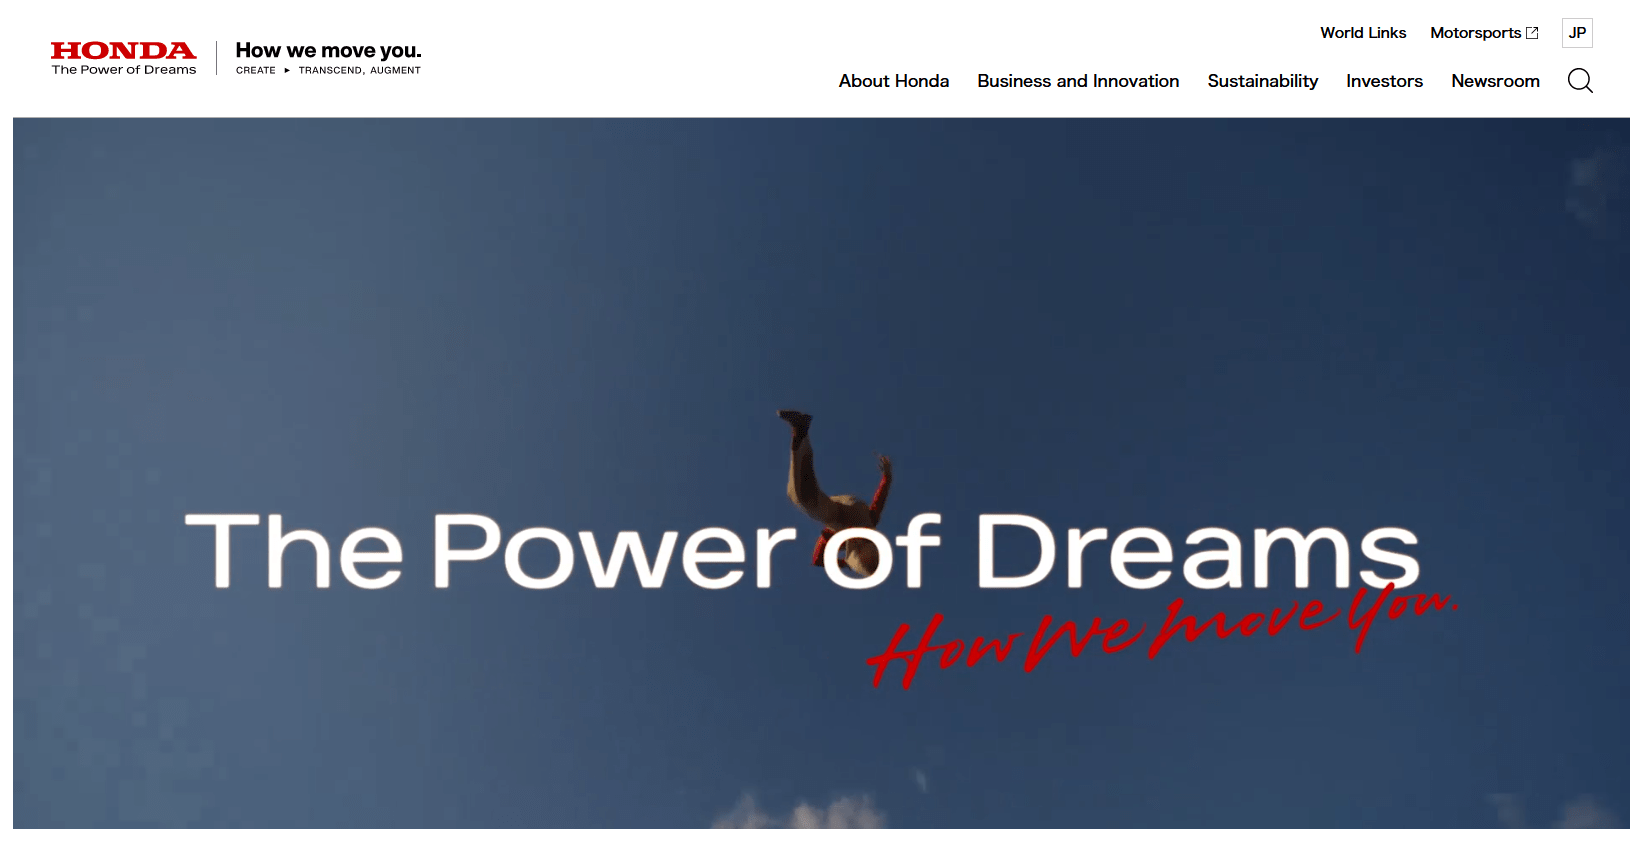 honda global home page focuses on brand messaging with the words power of dreams and how we move you